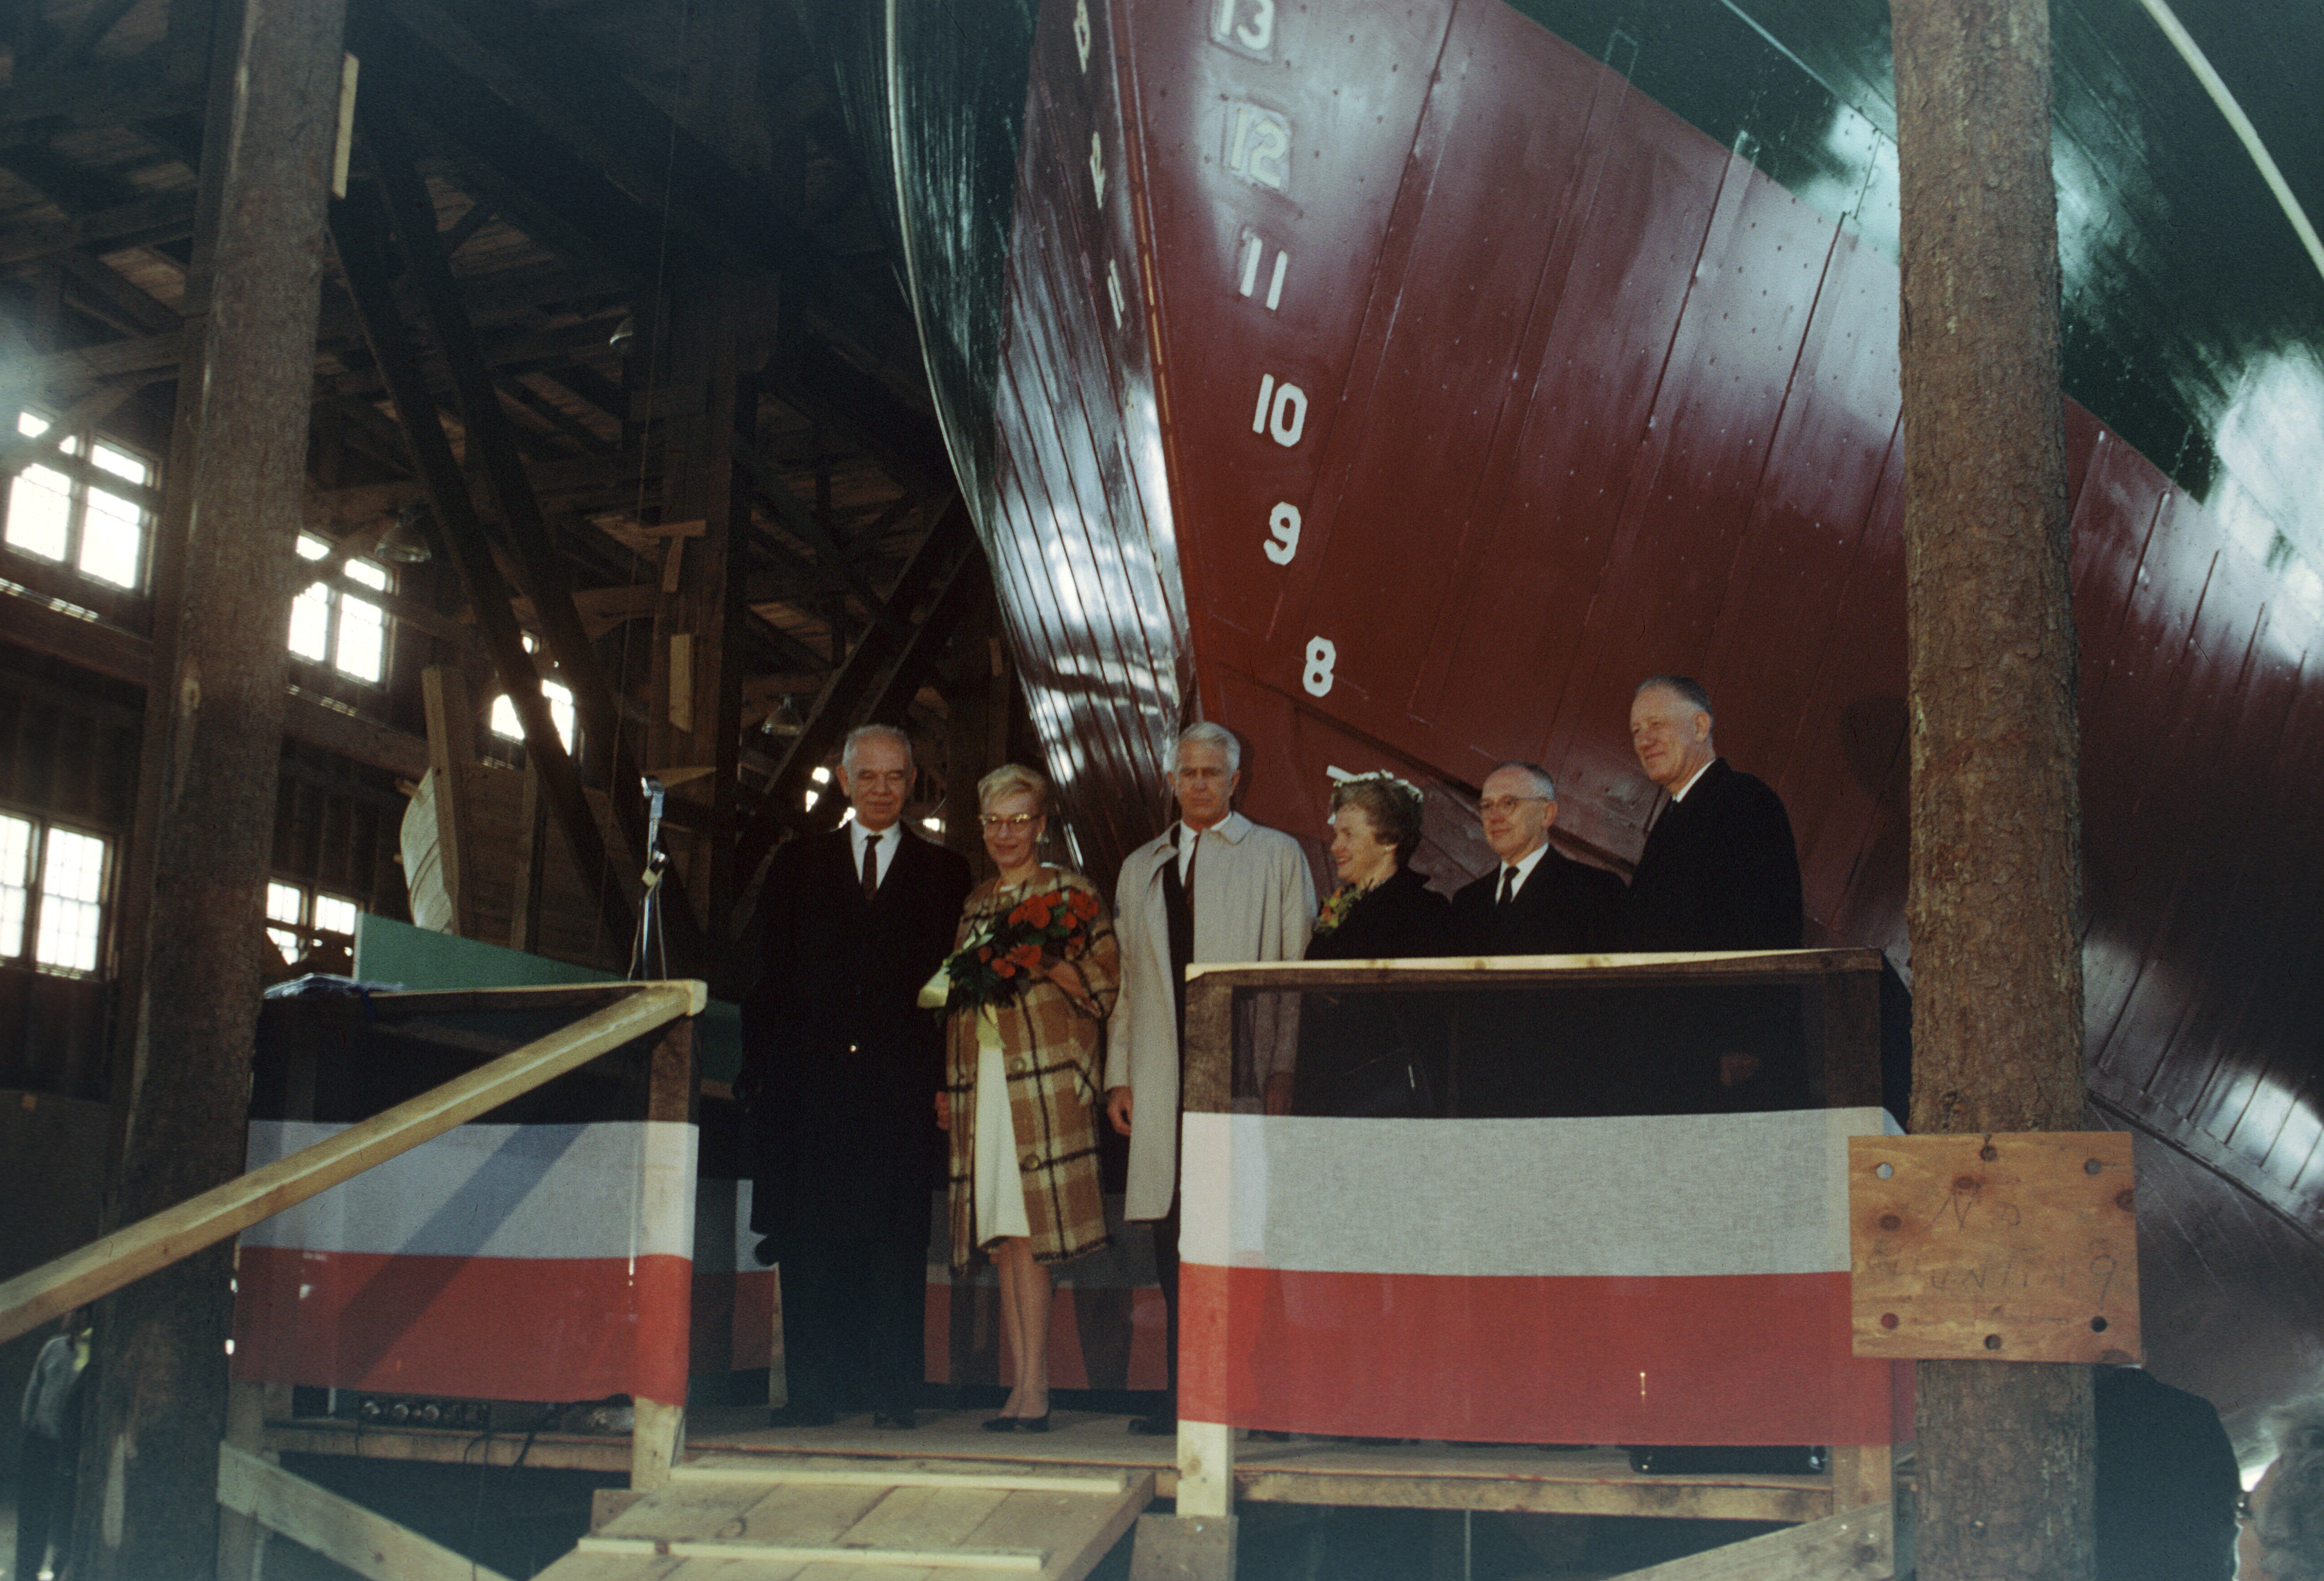 Six people dressed in formal attire about to christen a ship.